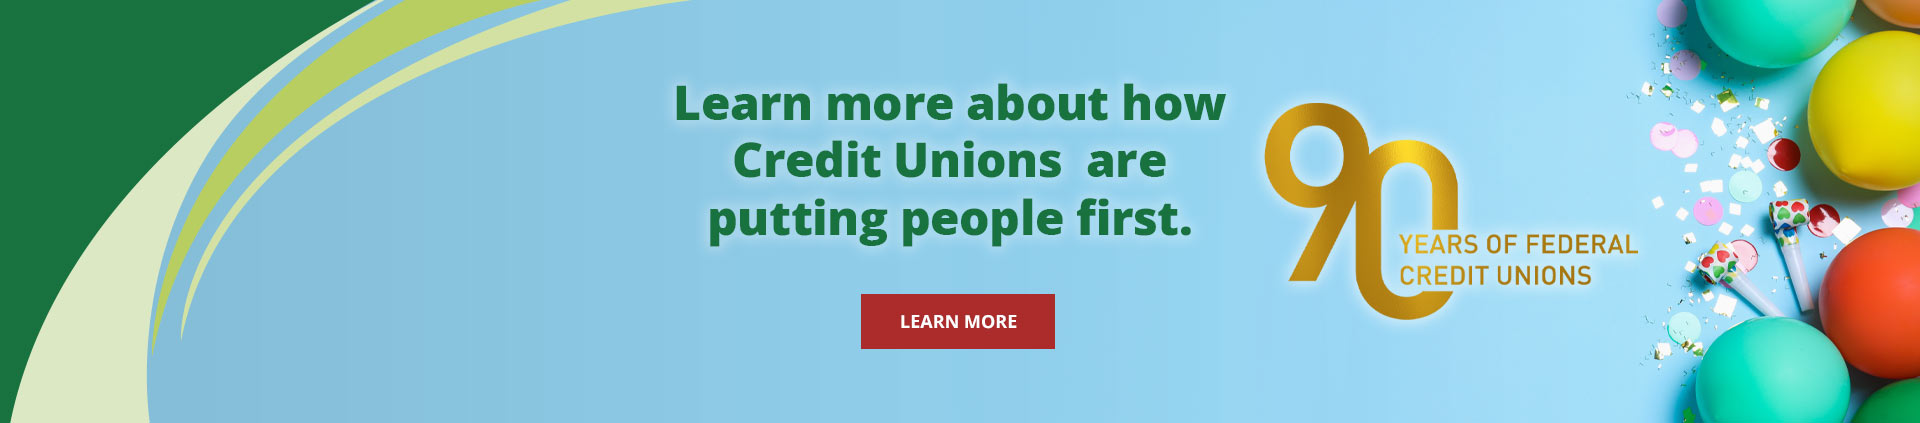 Learn more about how Credit Unions are putting people first.90 years of Federal Credit UnionsLearn More